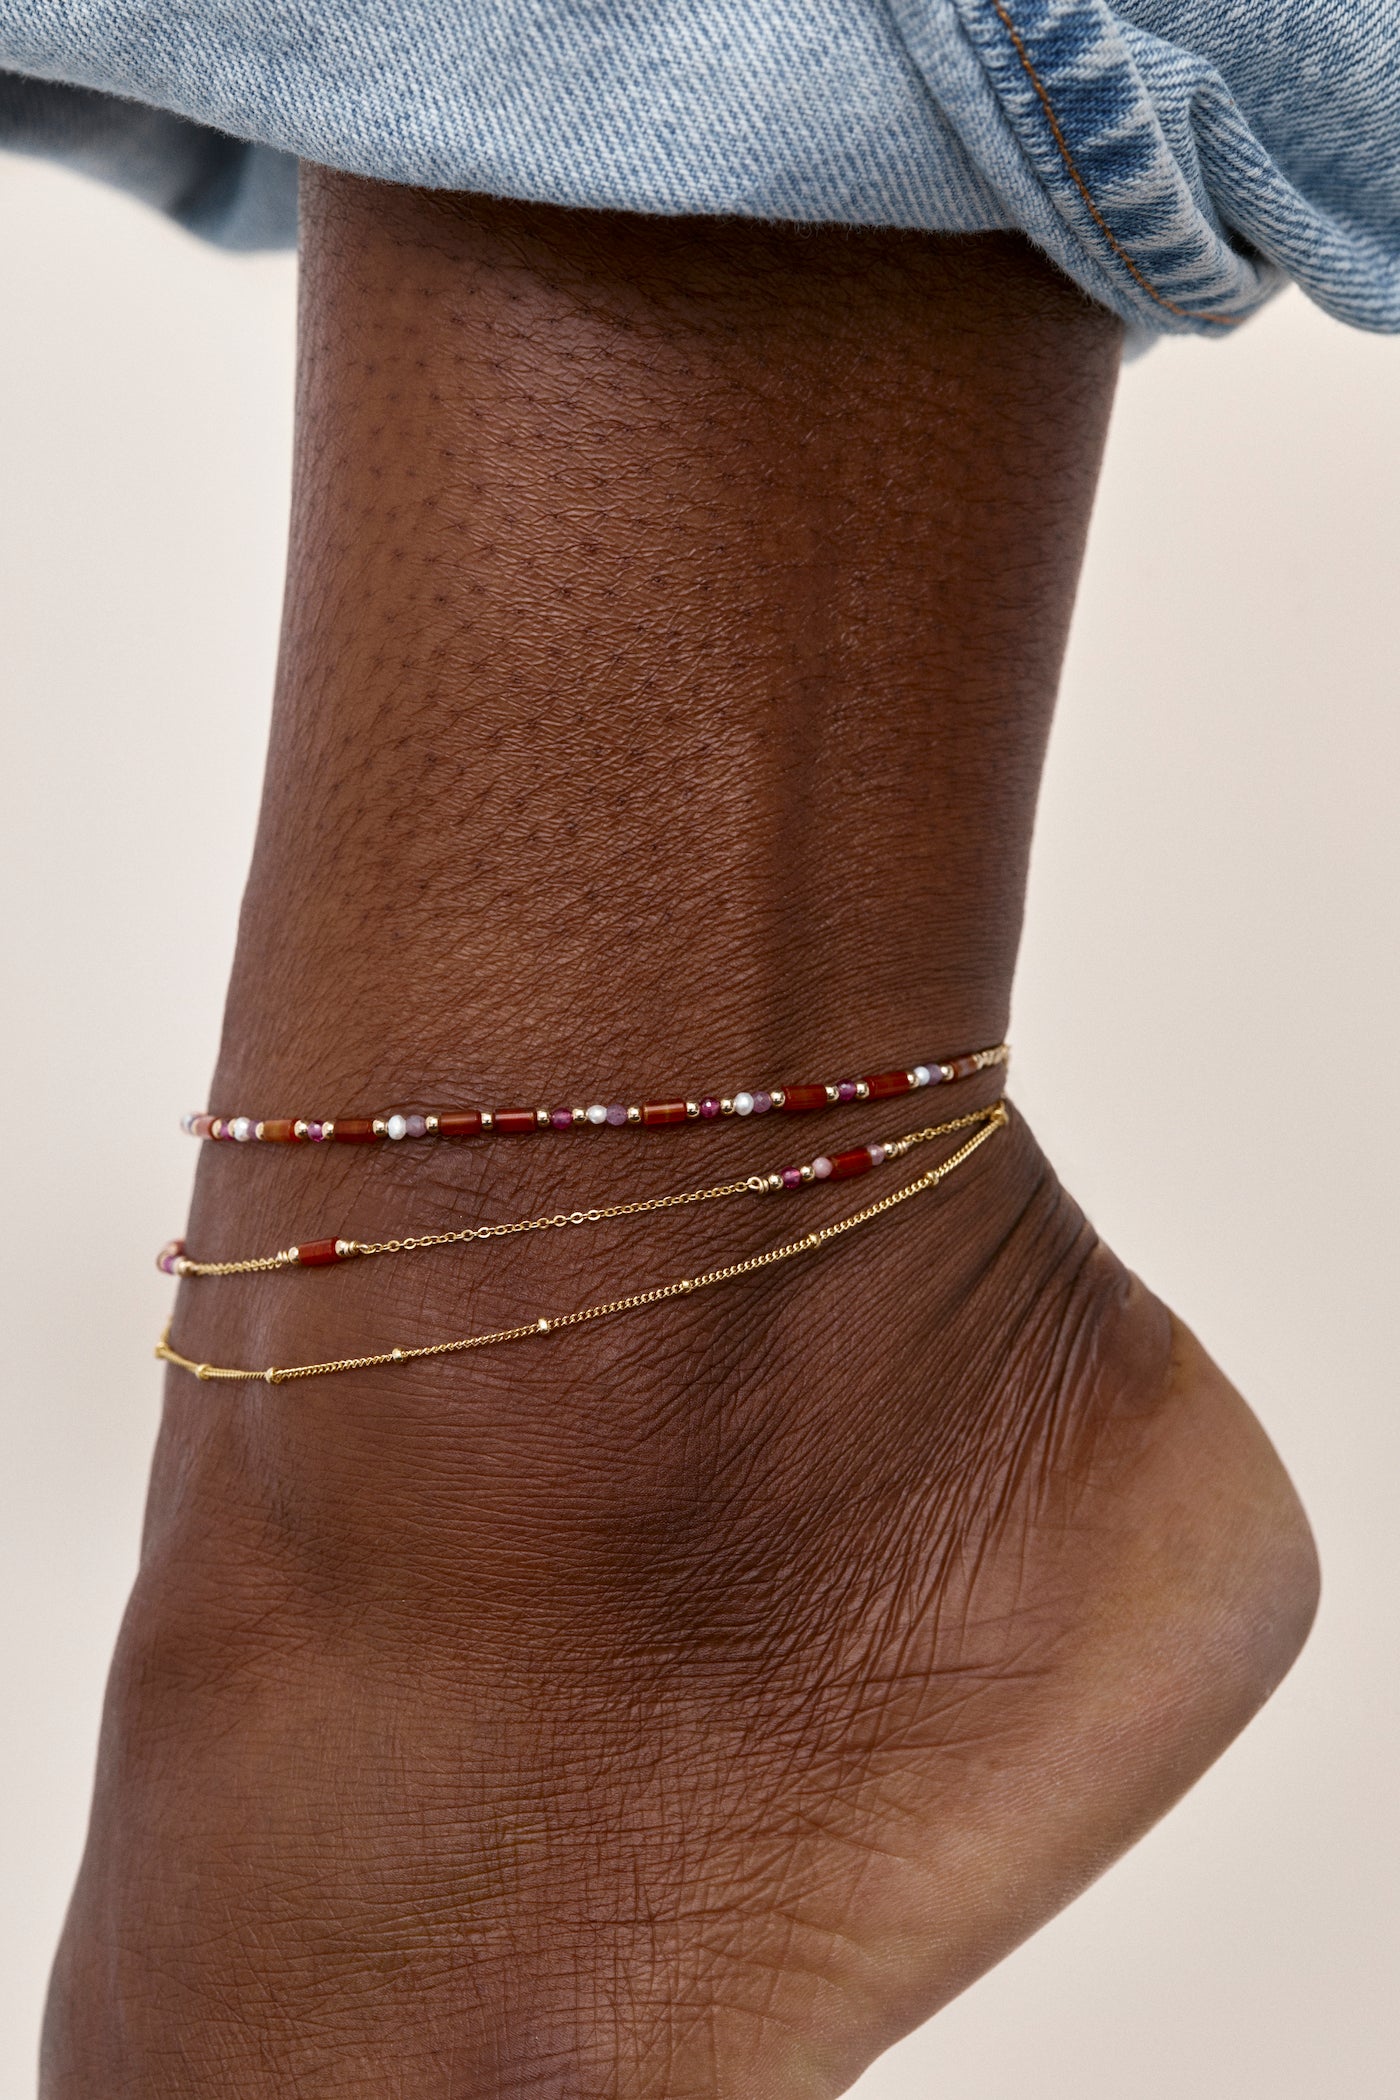 Lamee Ankle Chain - Tangerine